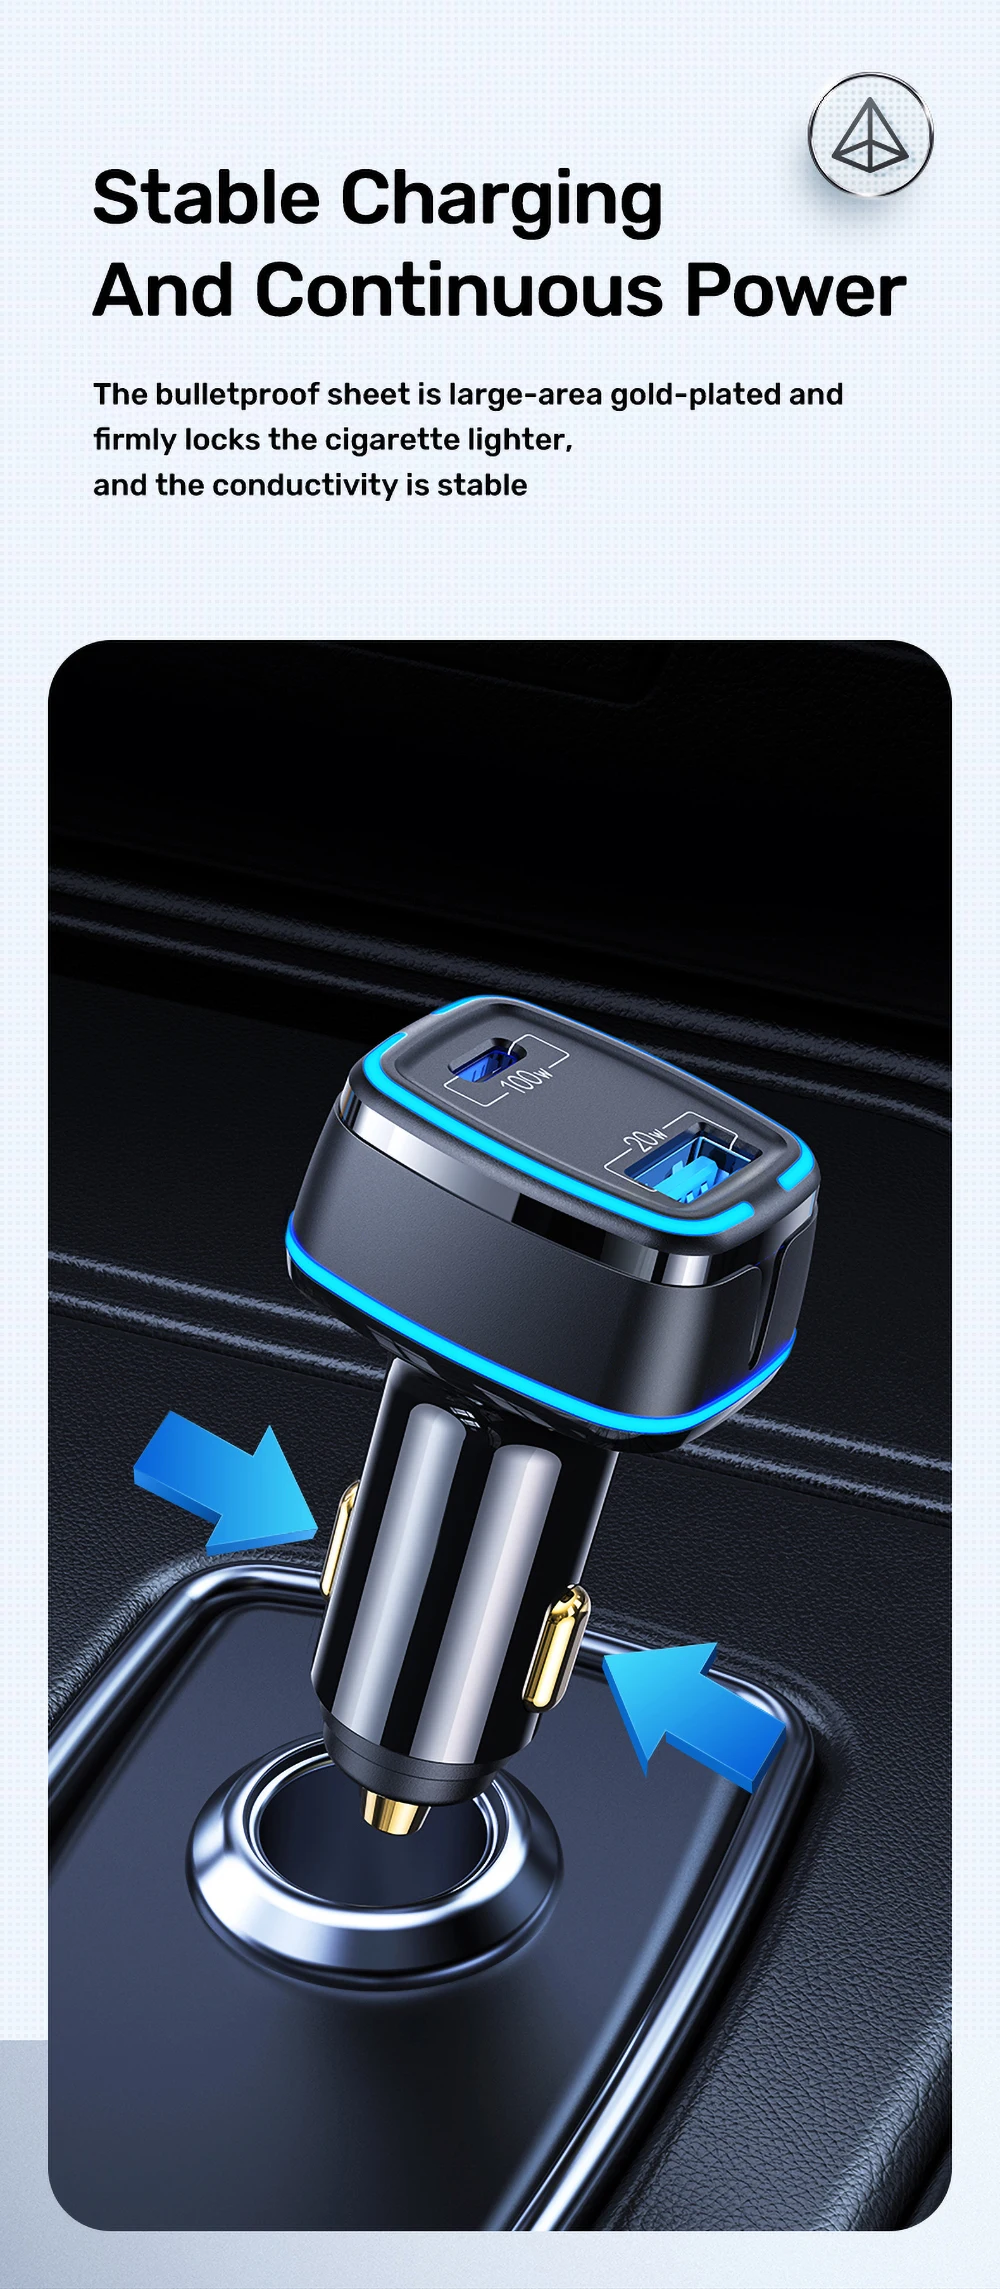 120W USB Car Charger Quick Charge QC VOOC SCP AFC Car USB Charger for Samsung Xiaomi Huawei PD USB C Charger For iPhone Macbook usb quick charge 3.0